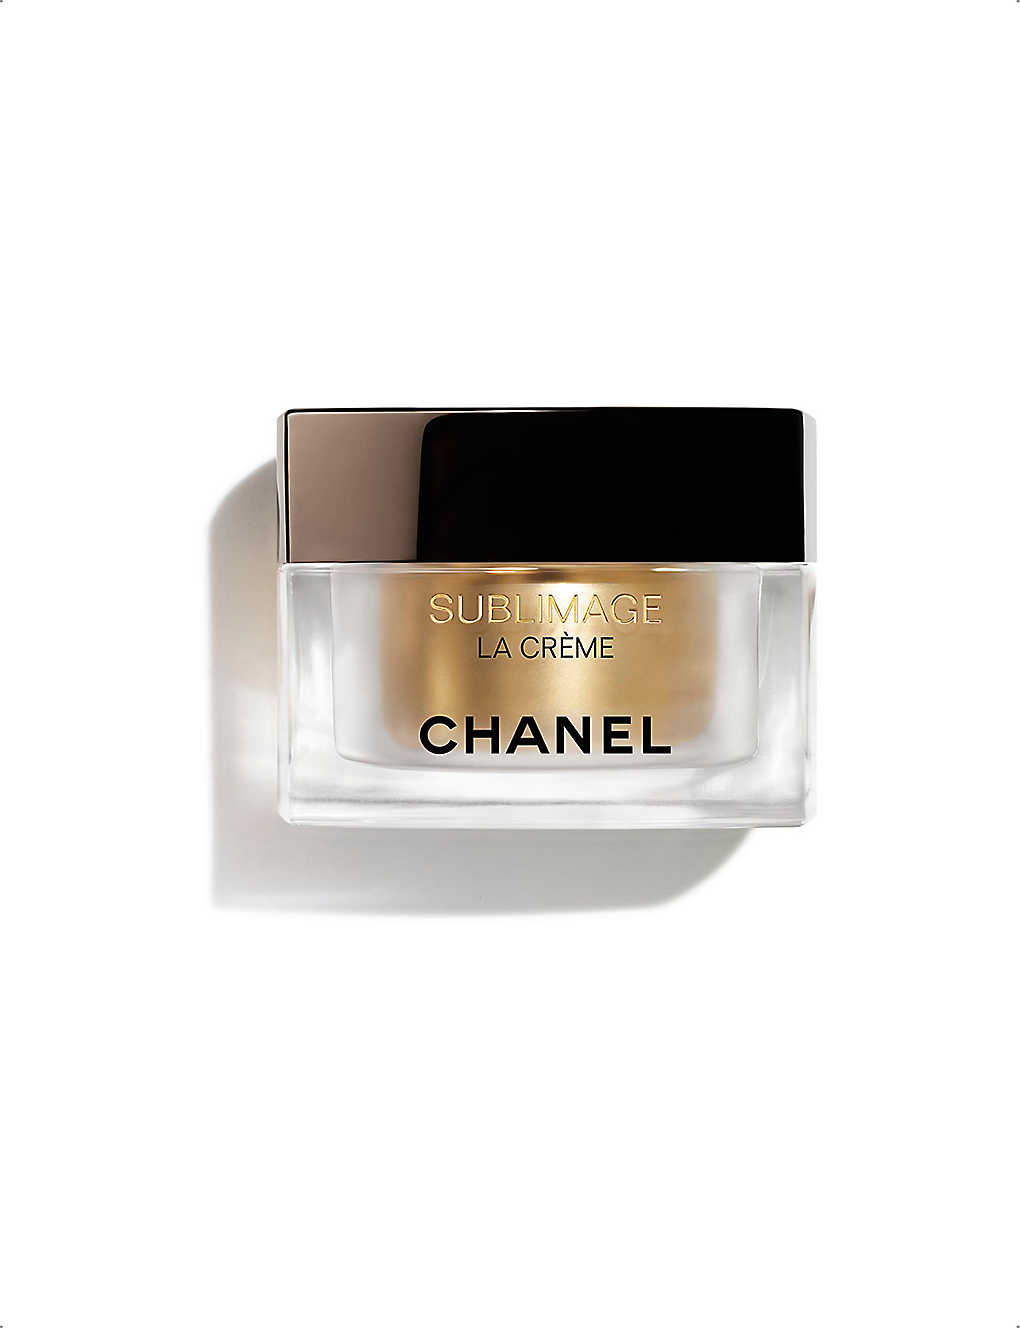 Beyond the Jar: Chanel reveals the key ingredient in its Sublimage  collection